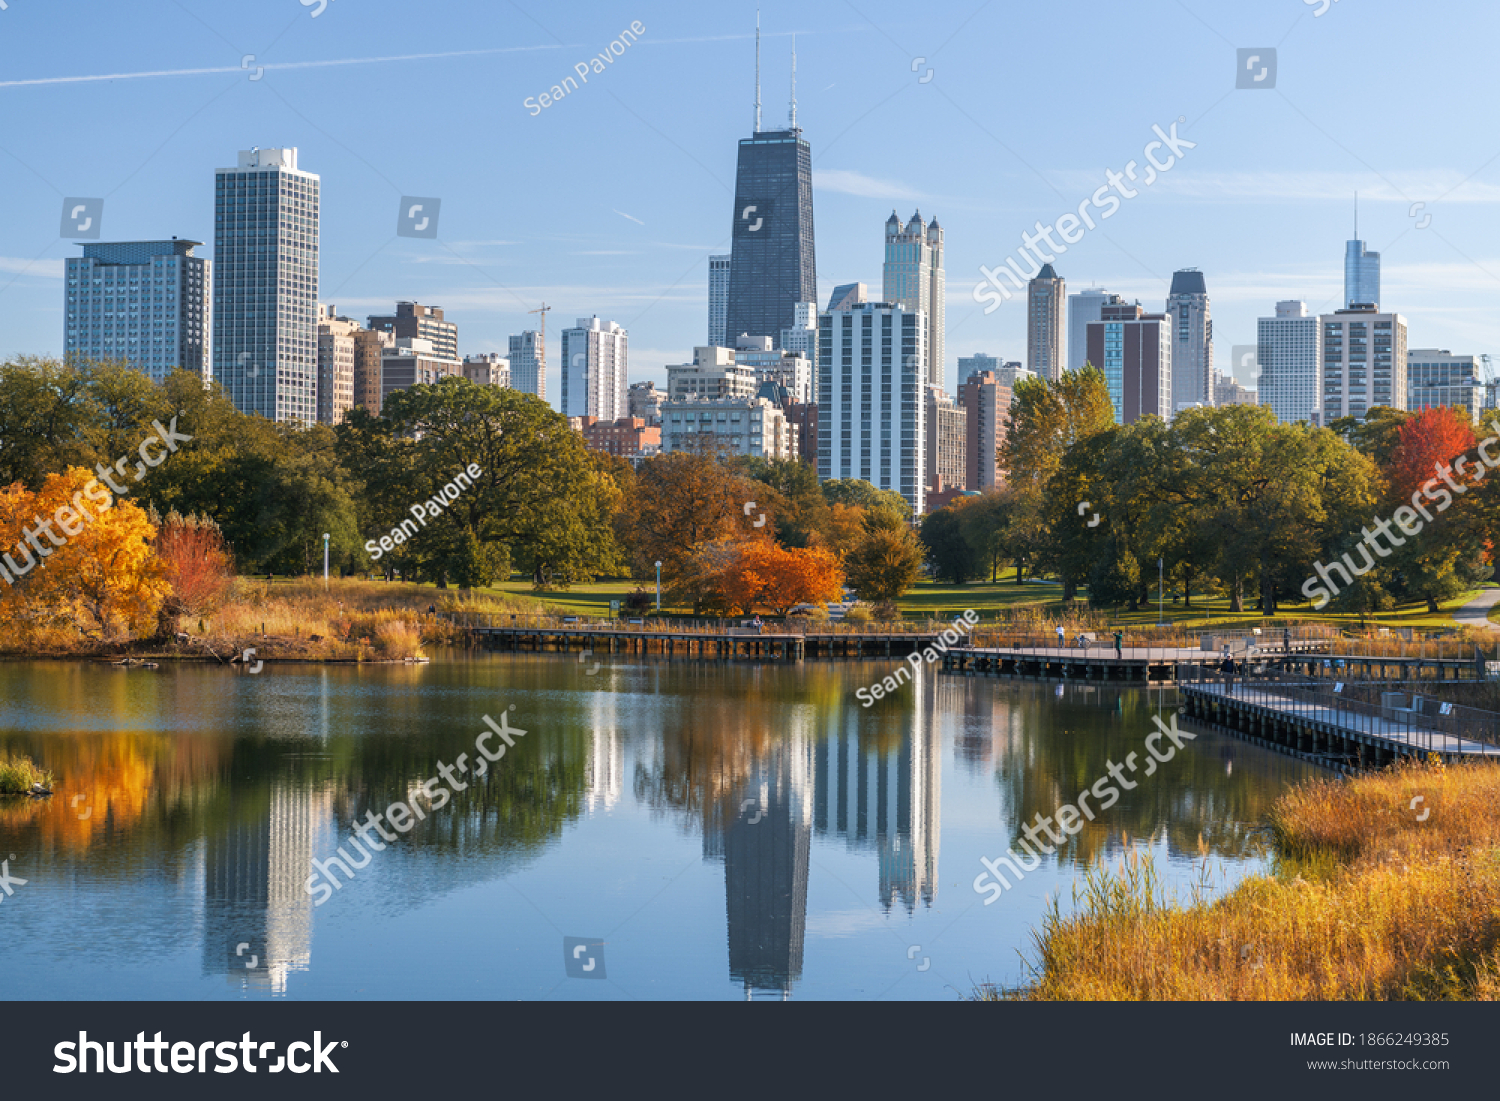 Chicago, Illinois, USA with Lincoln Park and the city skyline during early autumn. #1866249385